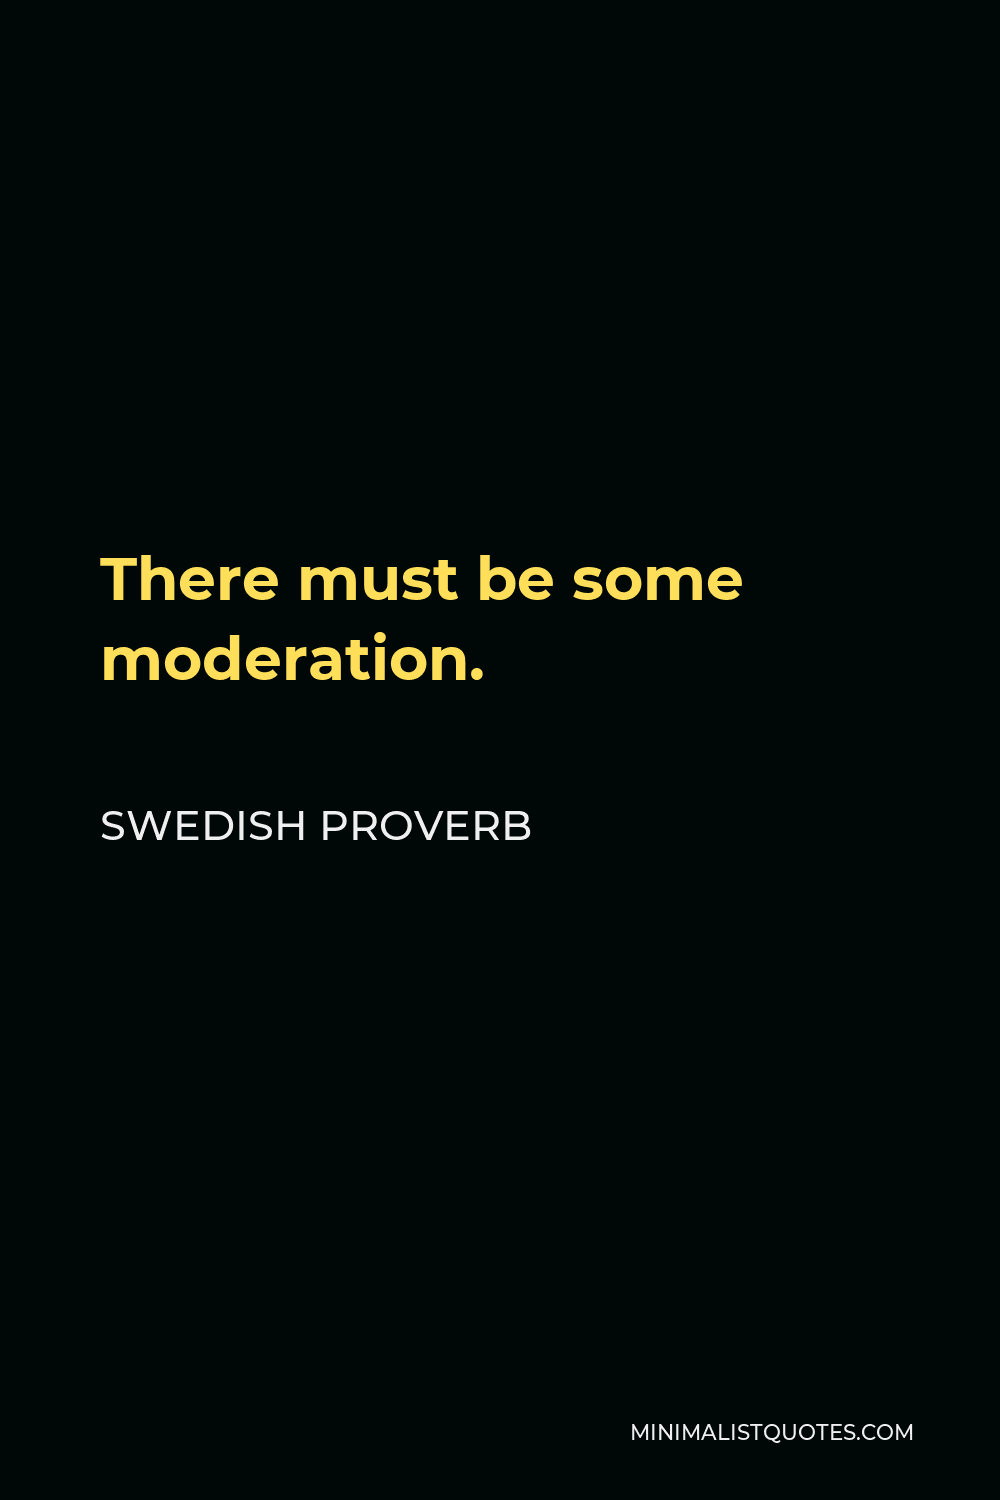 Swedish Proverb Quote - There must be some moderation.